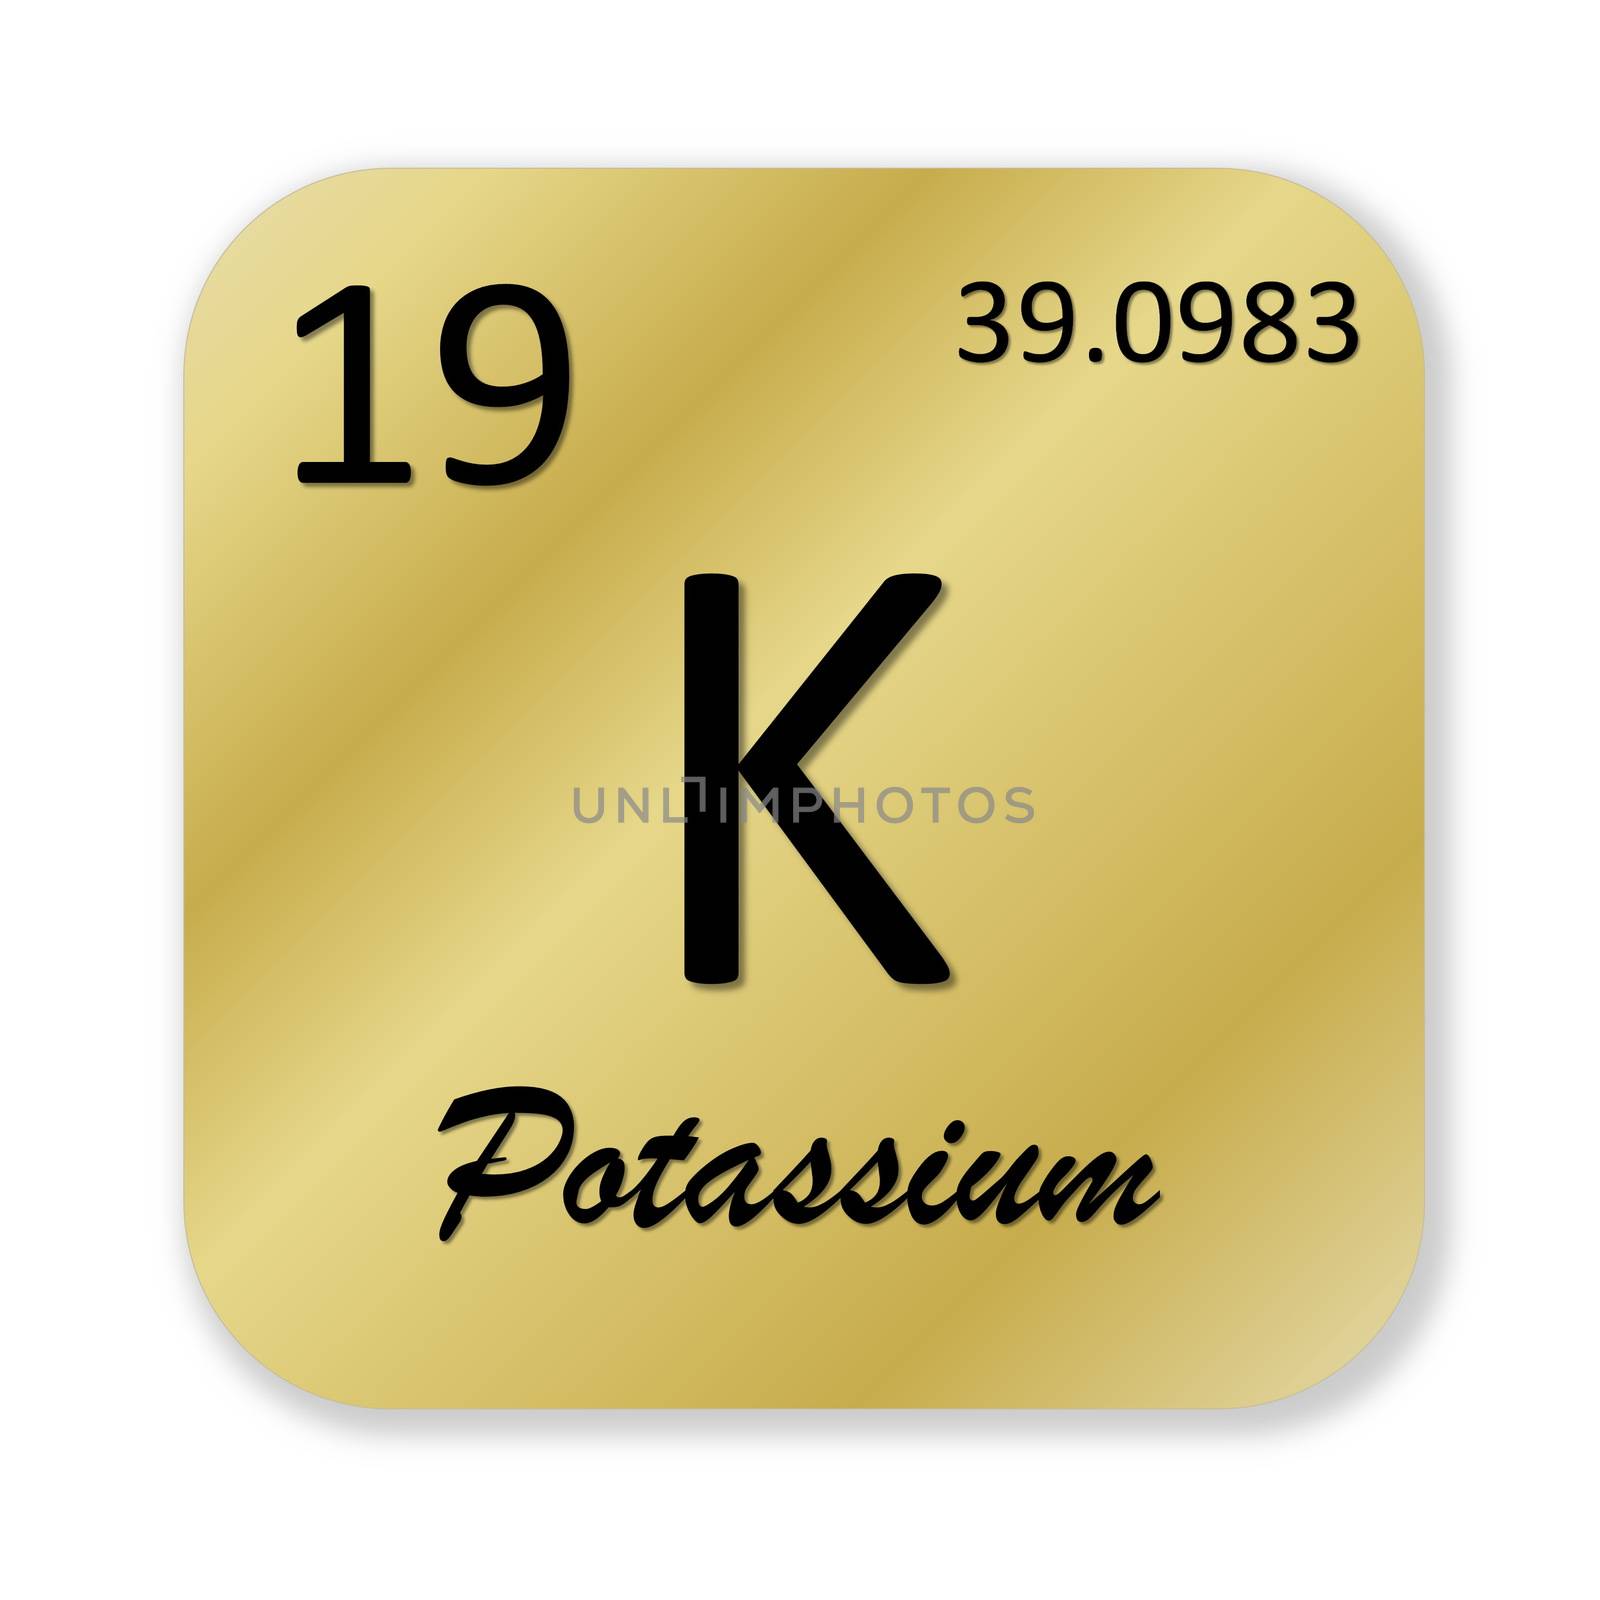 Black potassium element into golden square shape isolated in white background